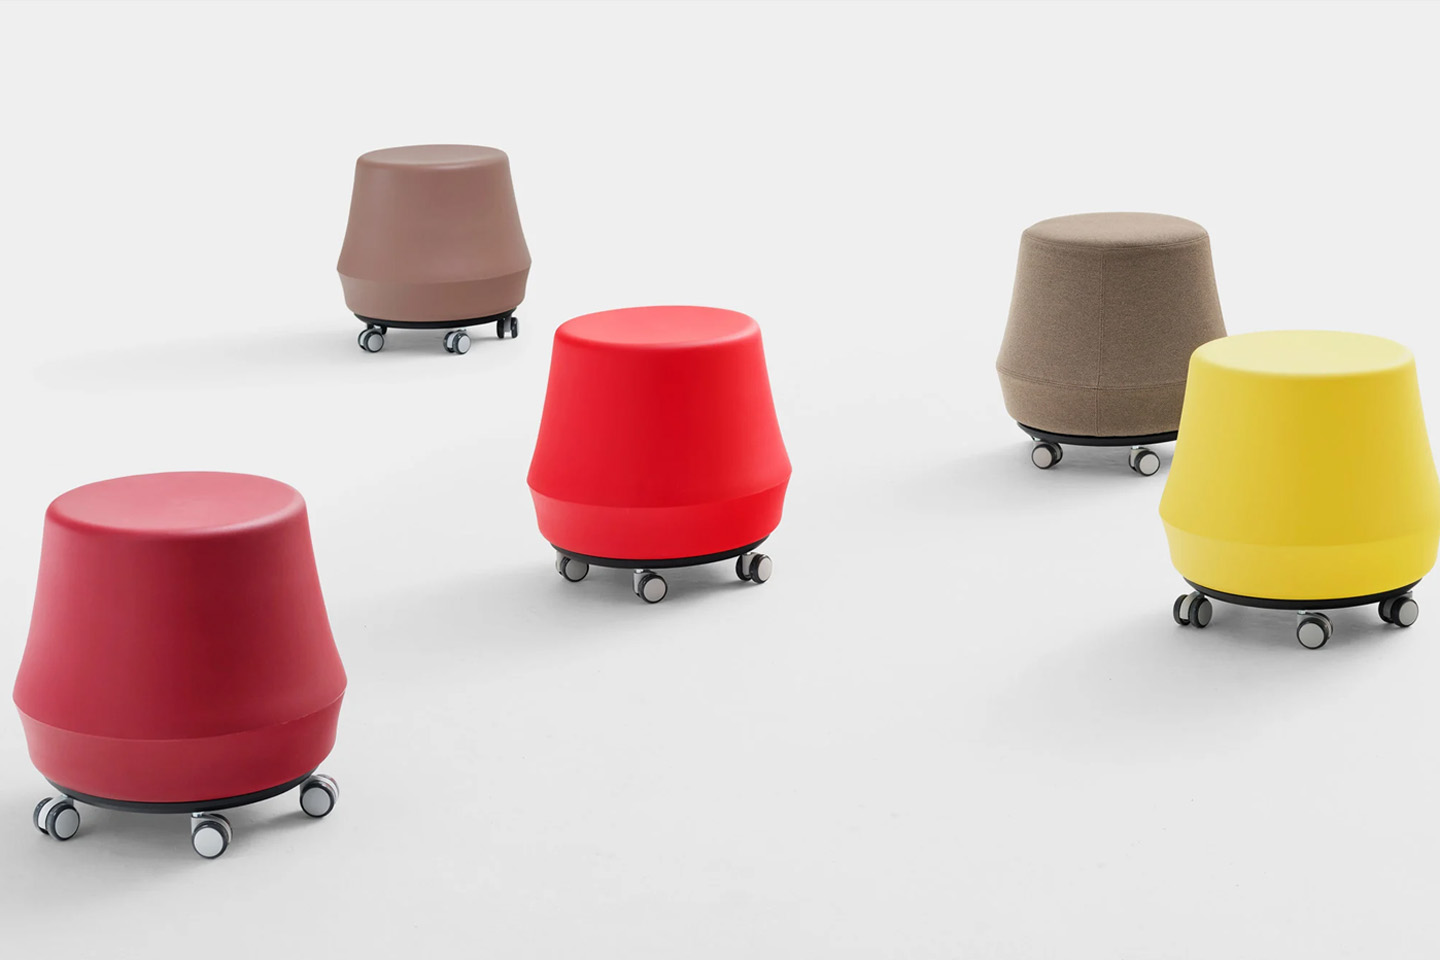 #This colorful stumpy stool with wheels is perfect for indoors and outdoors